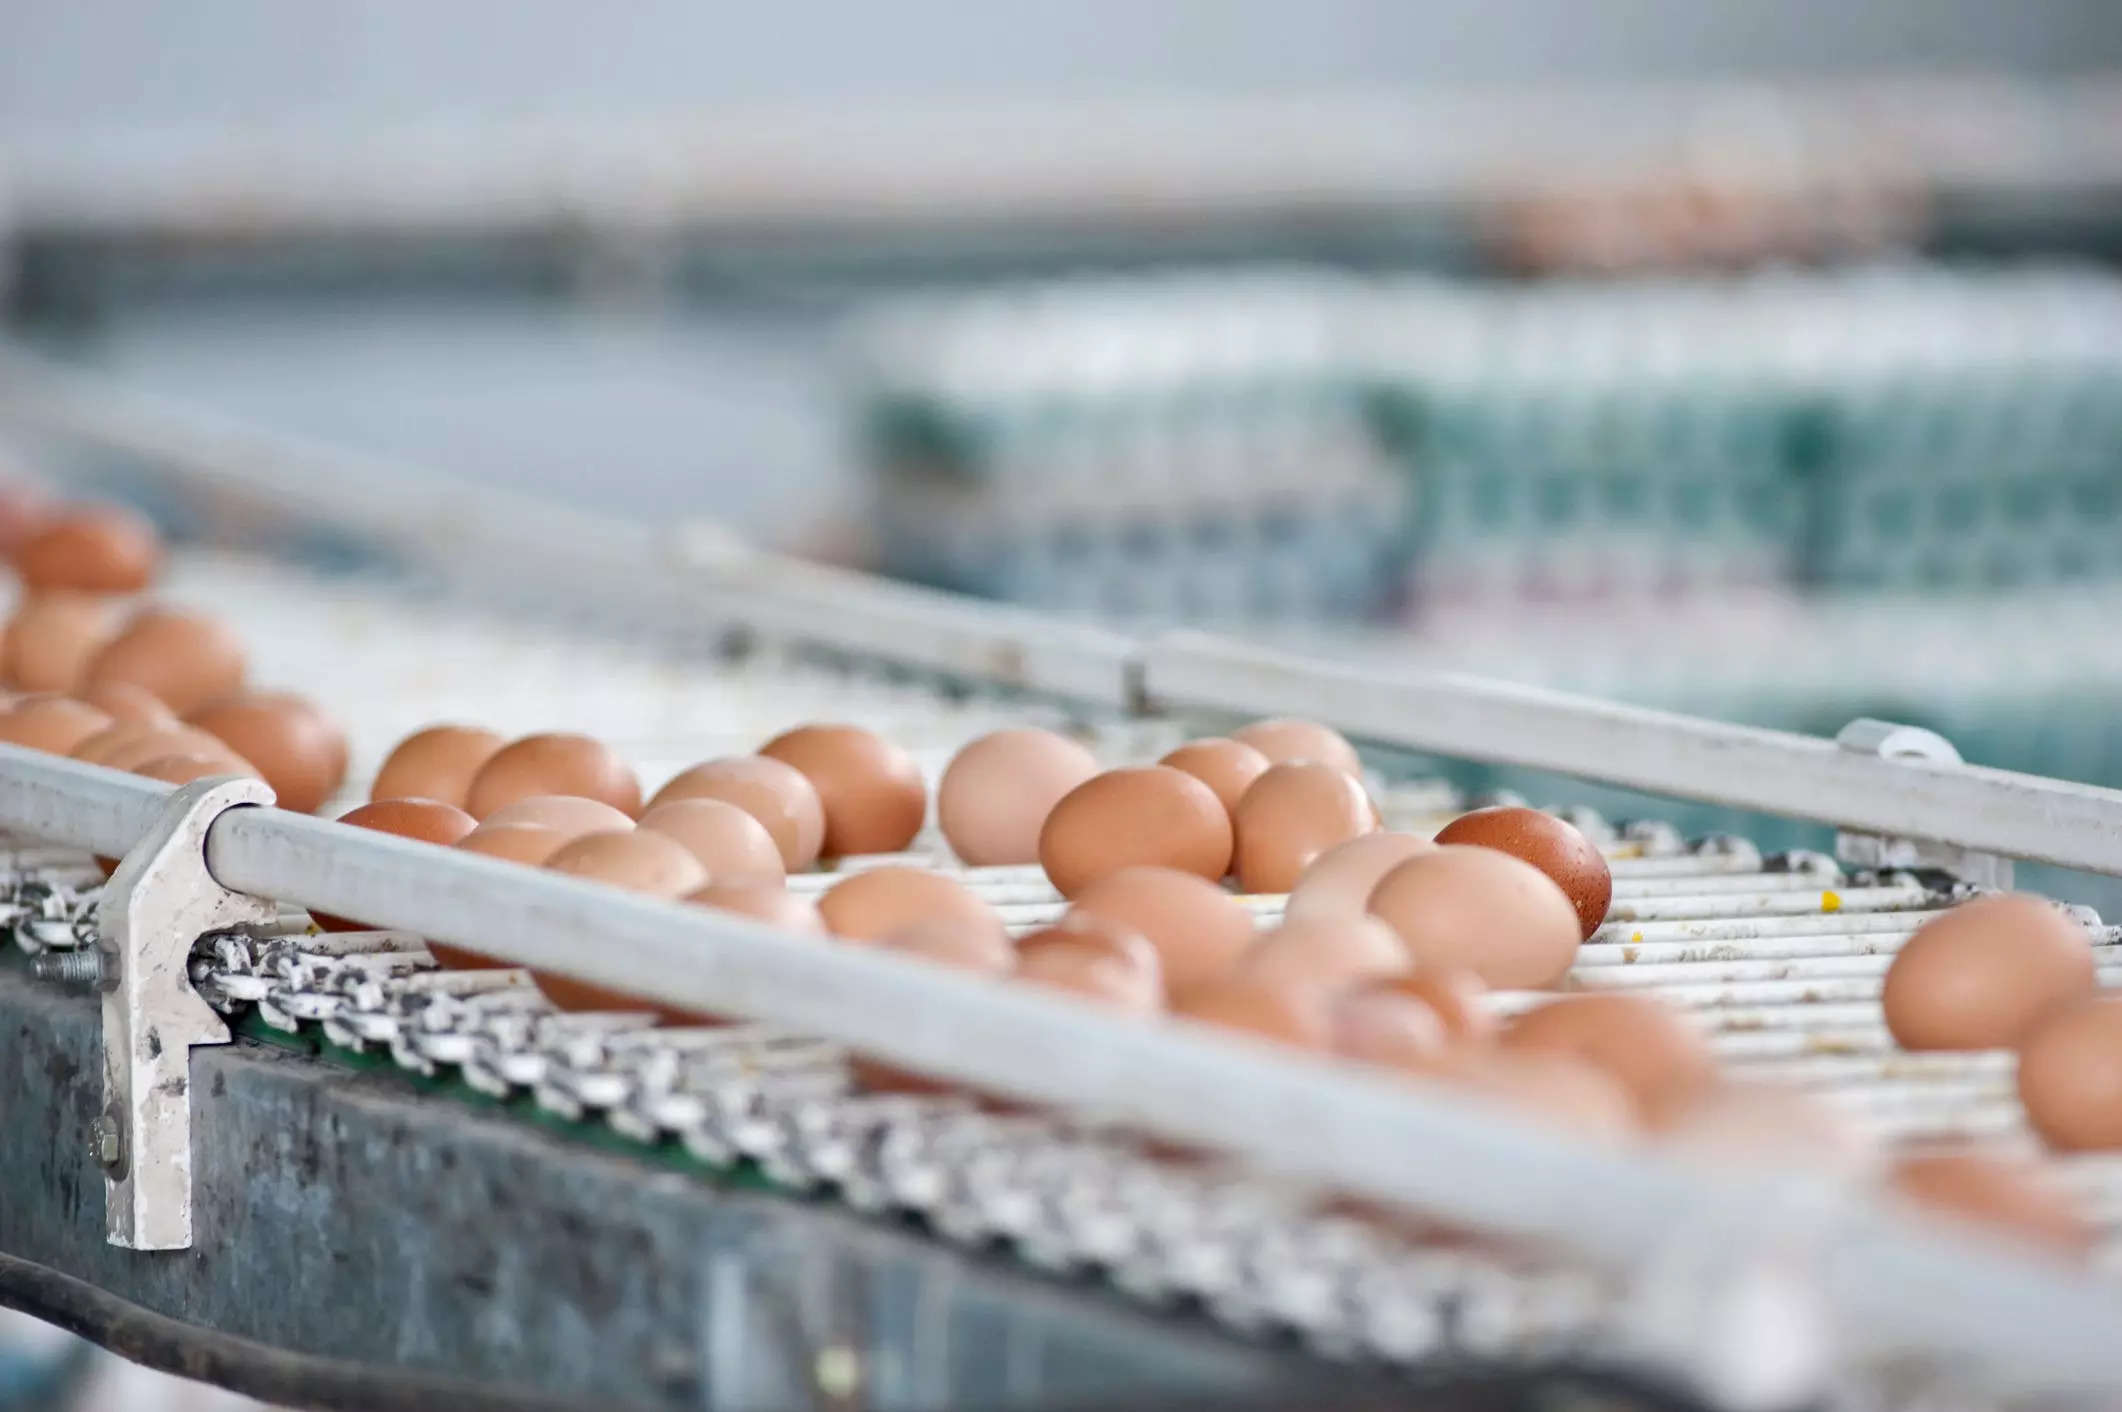 Eggs on a commercial production line.